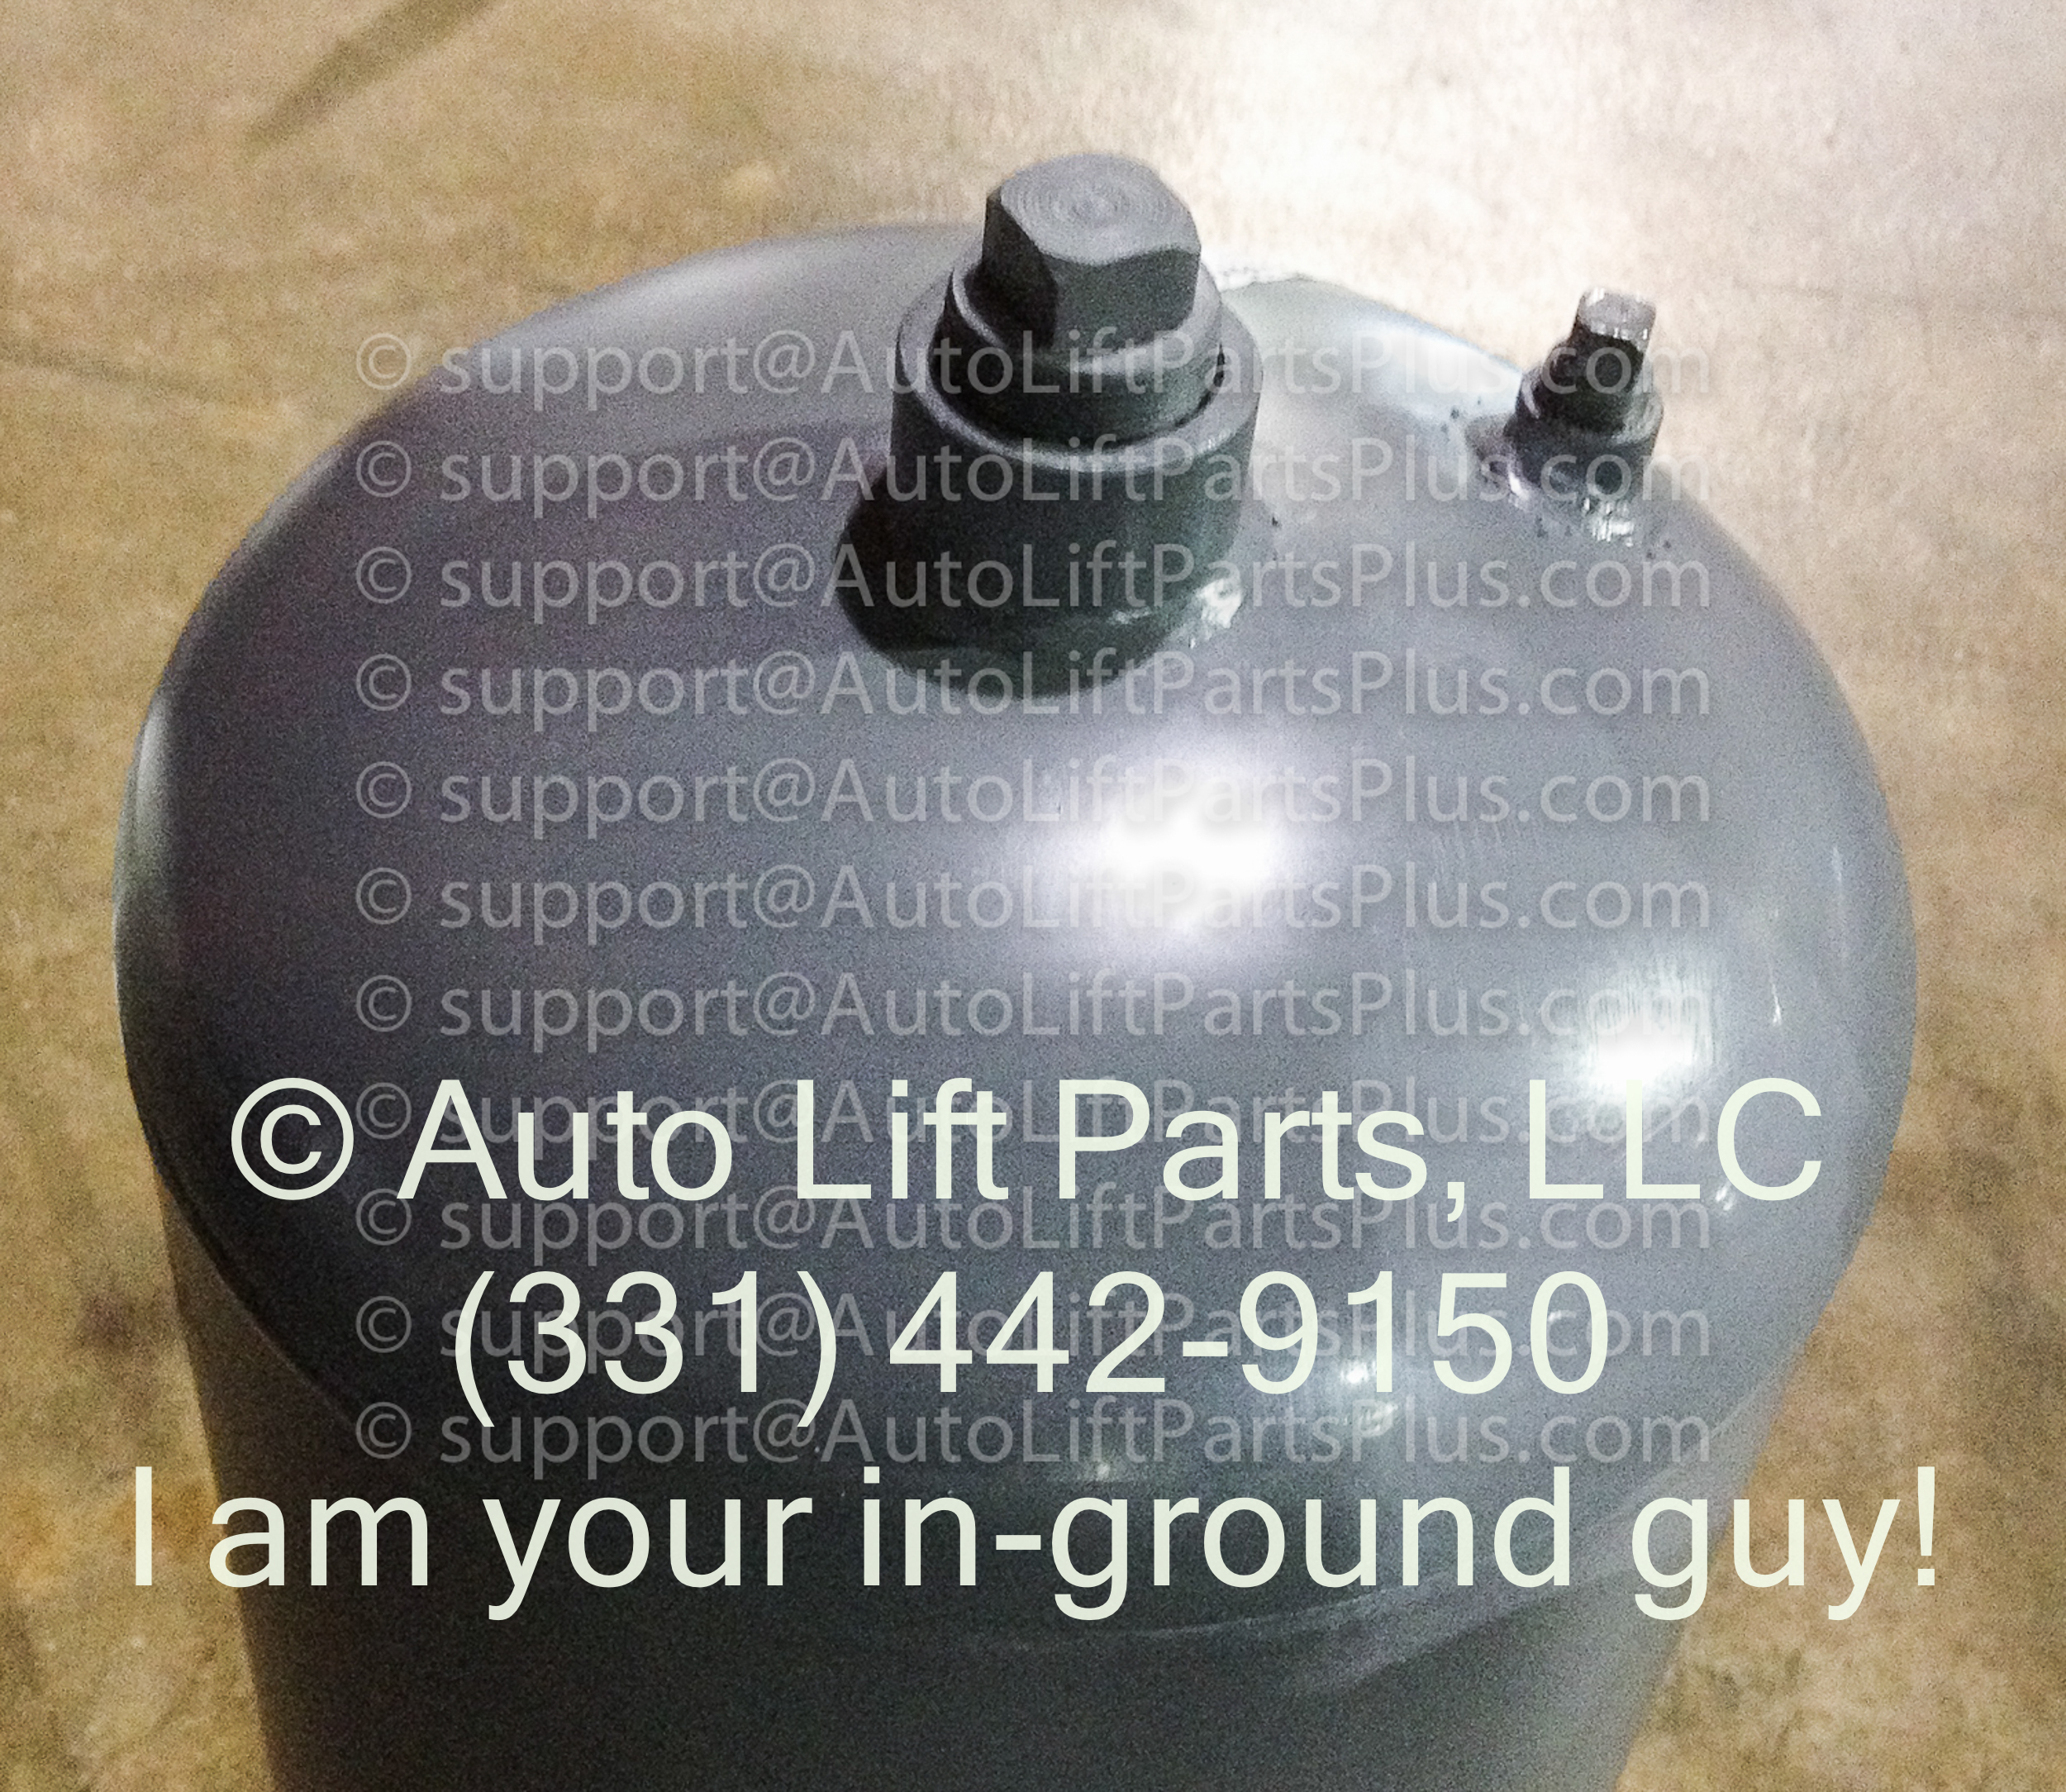 Non-Locking Air Control Valve for In-Ground Auto Lifts Gilbarco Lift 